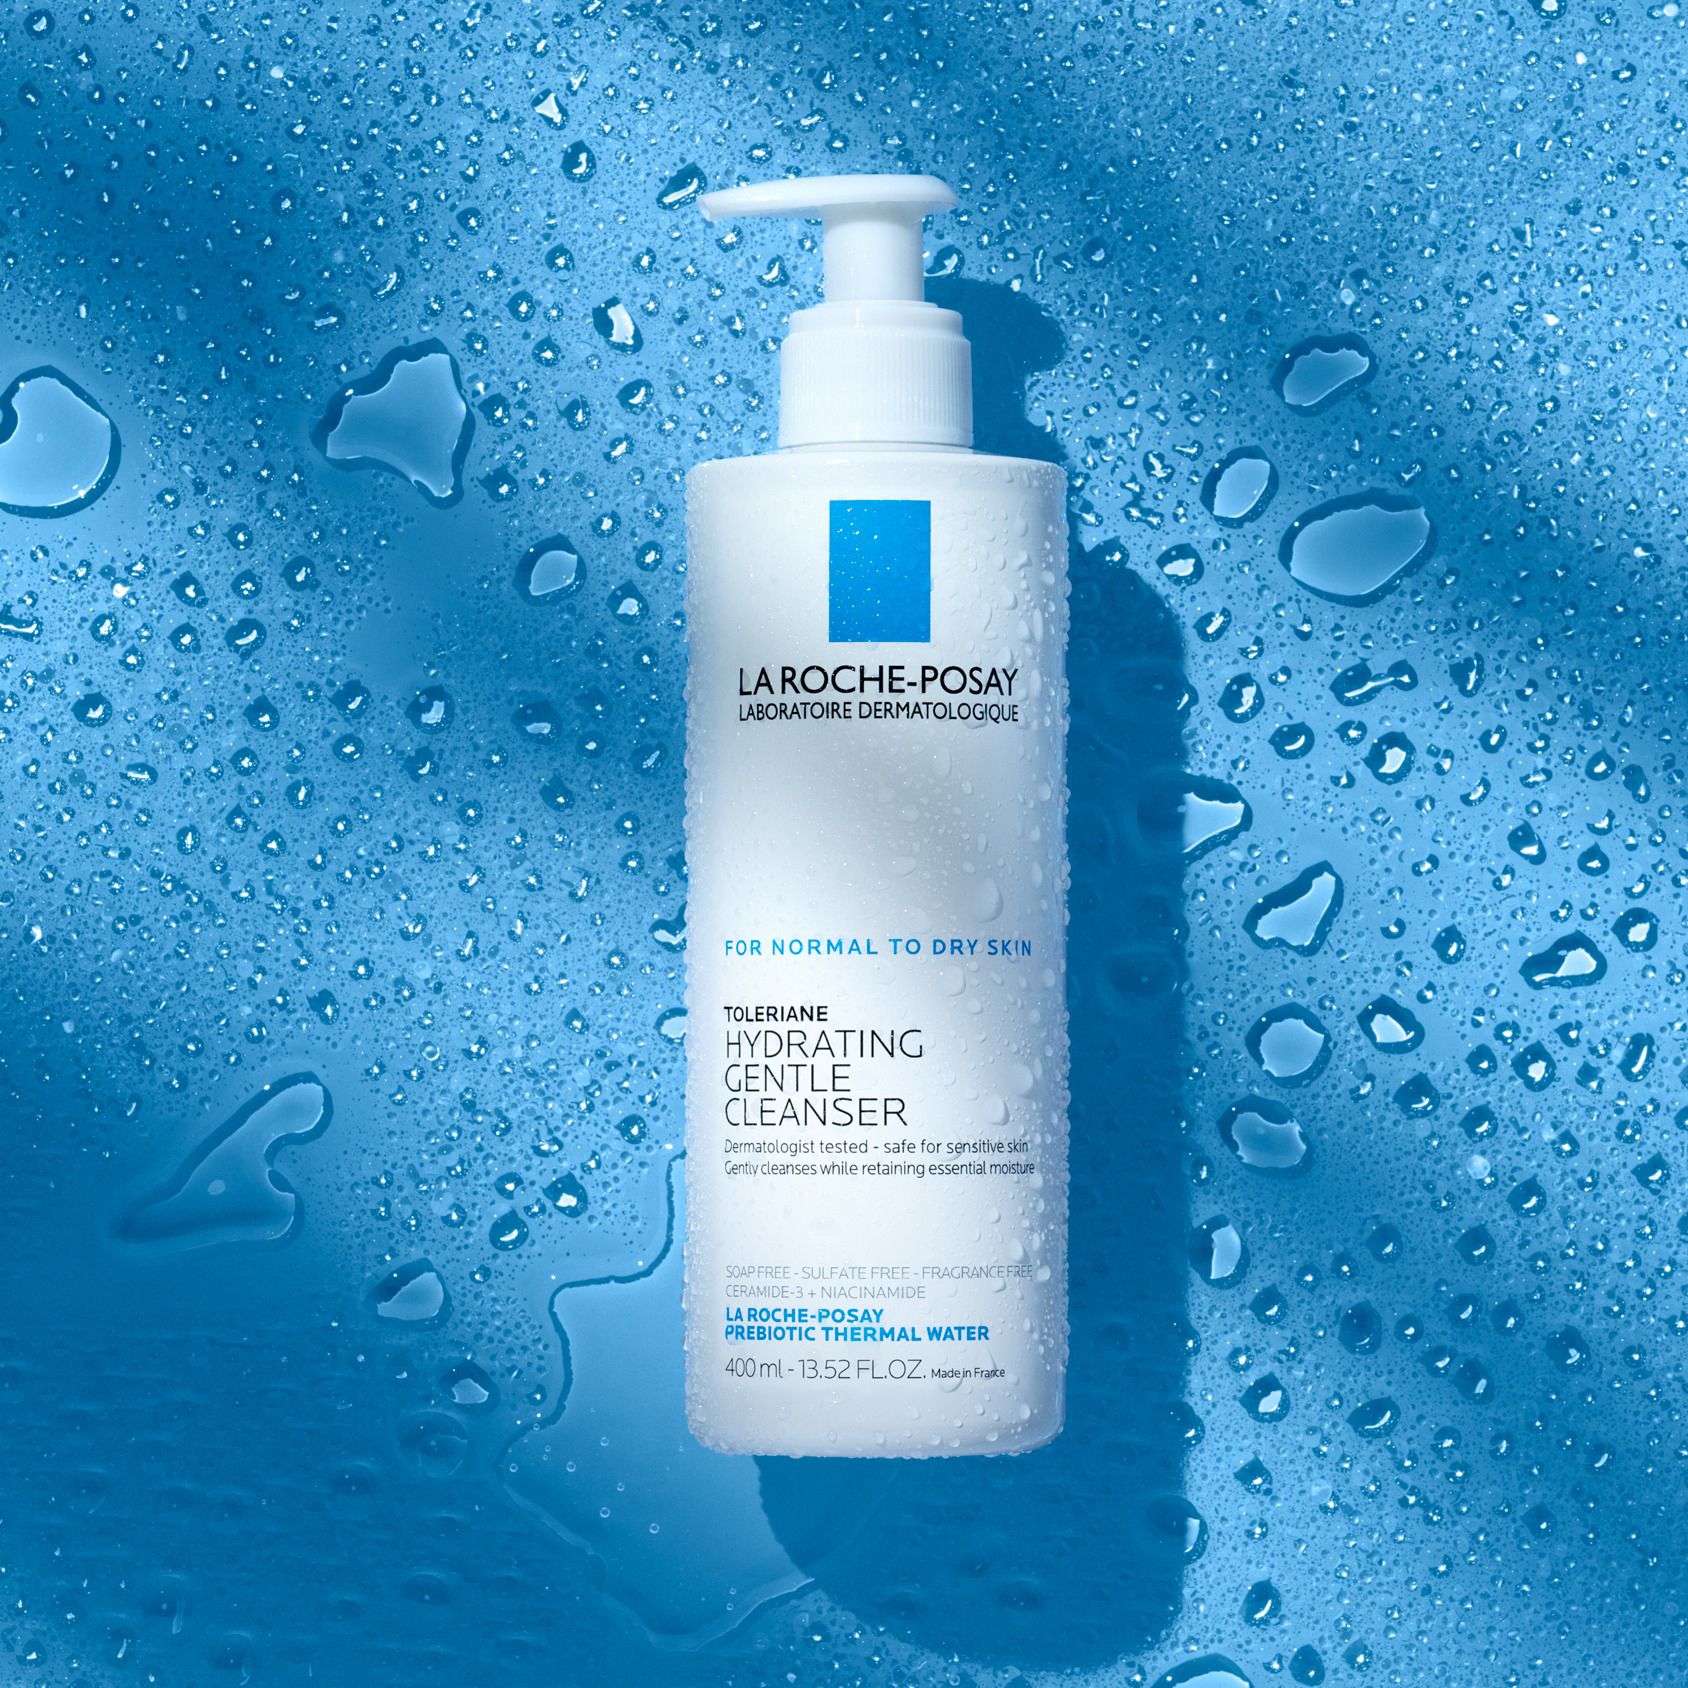 Toleriane Hydrating Gentle Face Cleanser for Dry Skin - La Roche-Posay